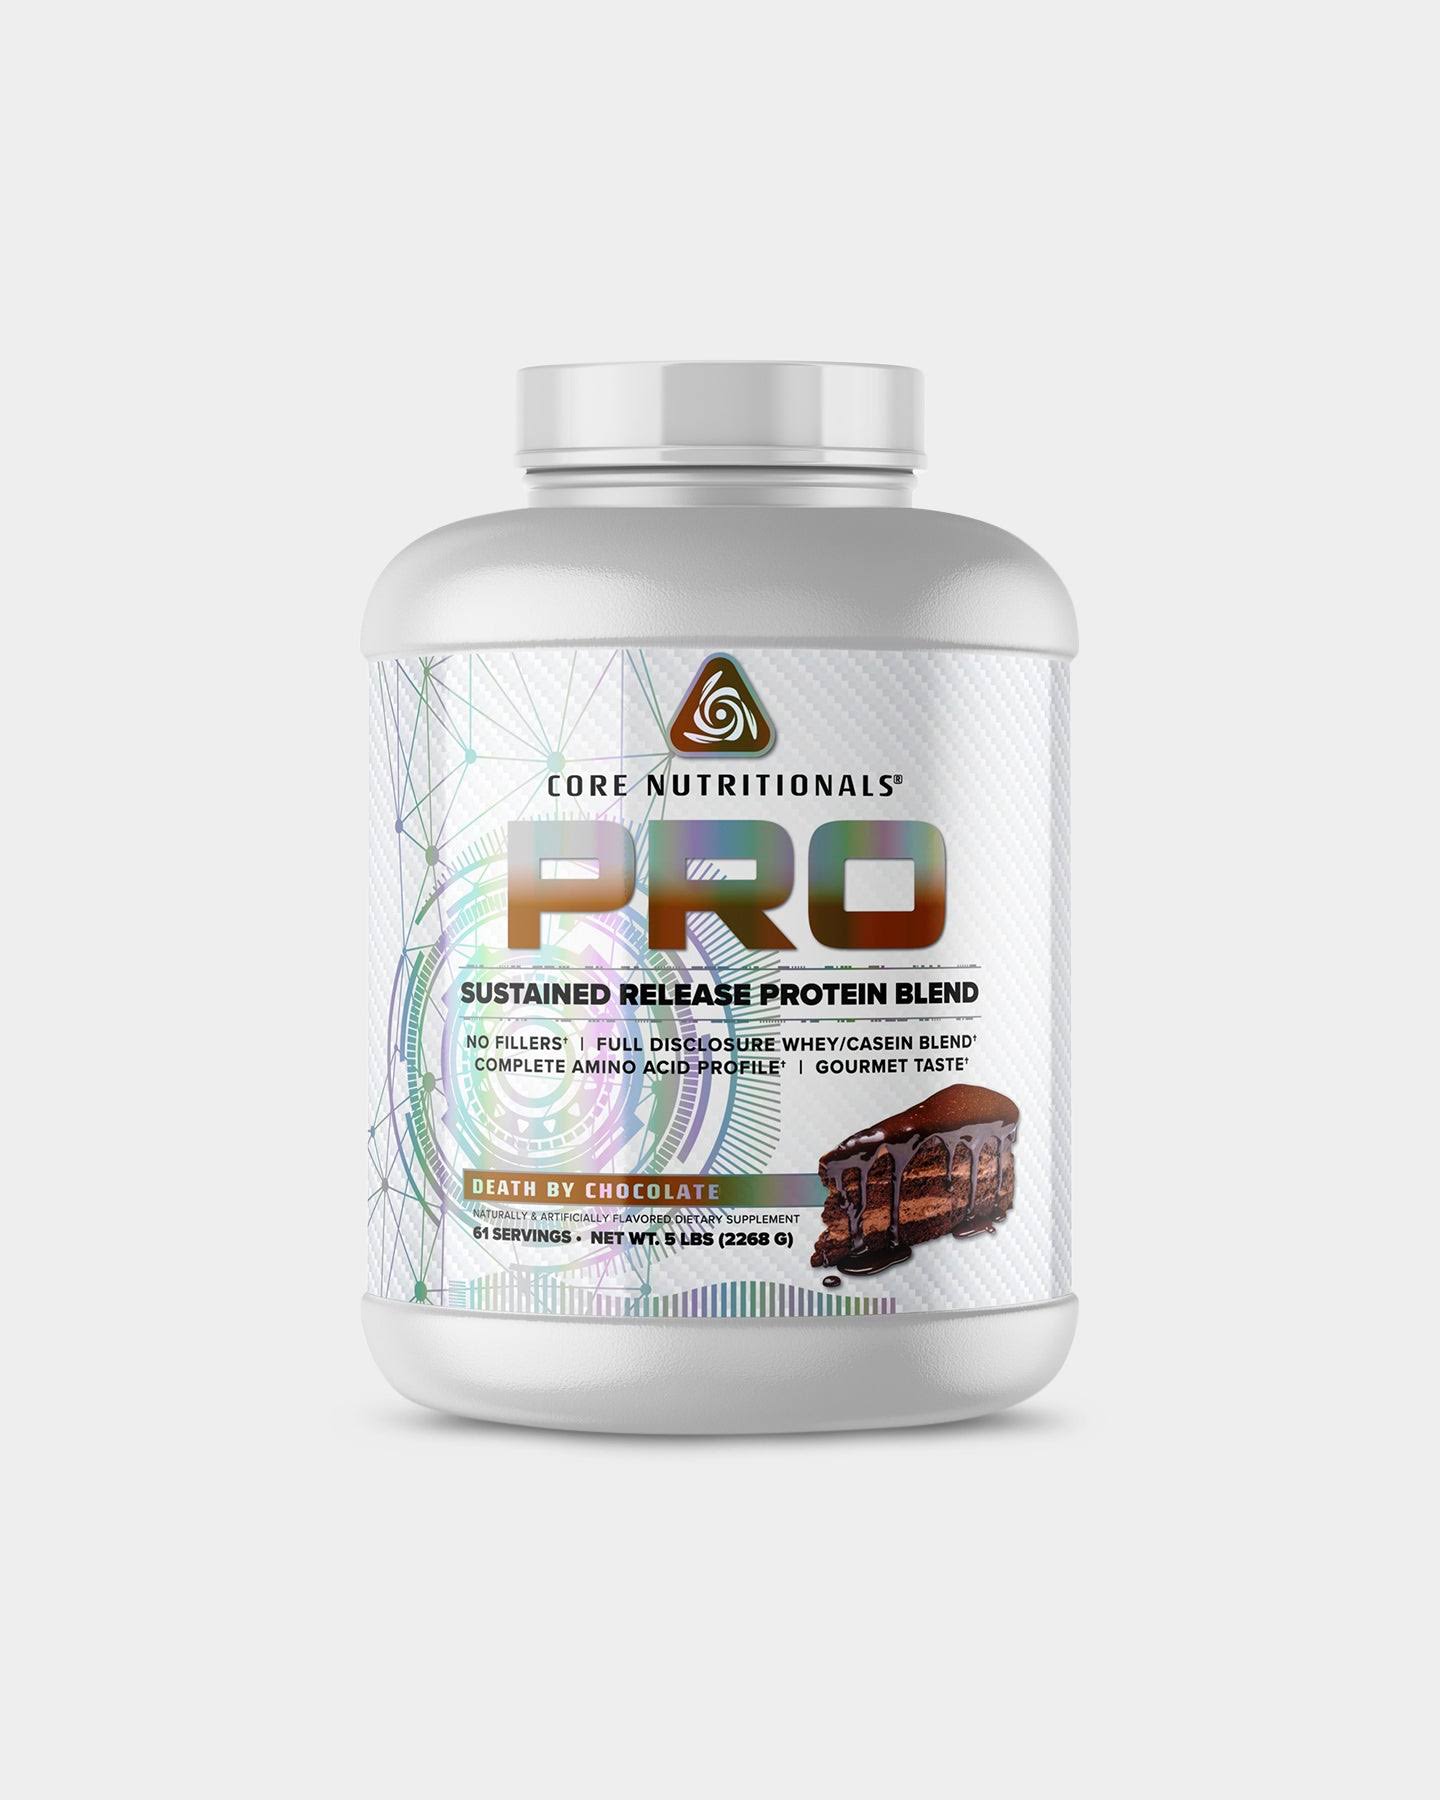 Core Nutritionals Core Pro Protein Blend Death by Chocolate / 5lb